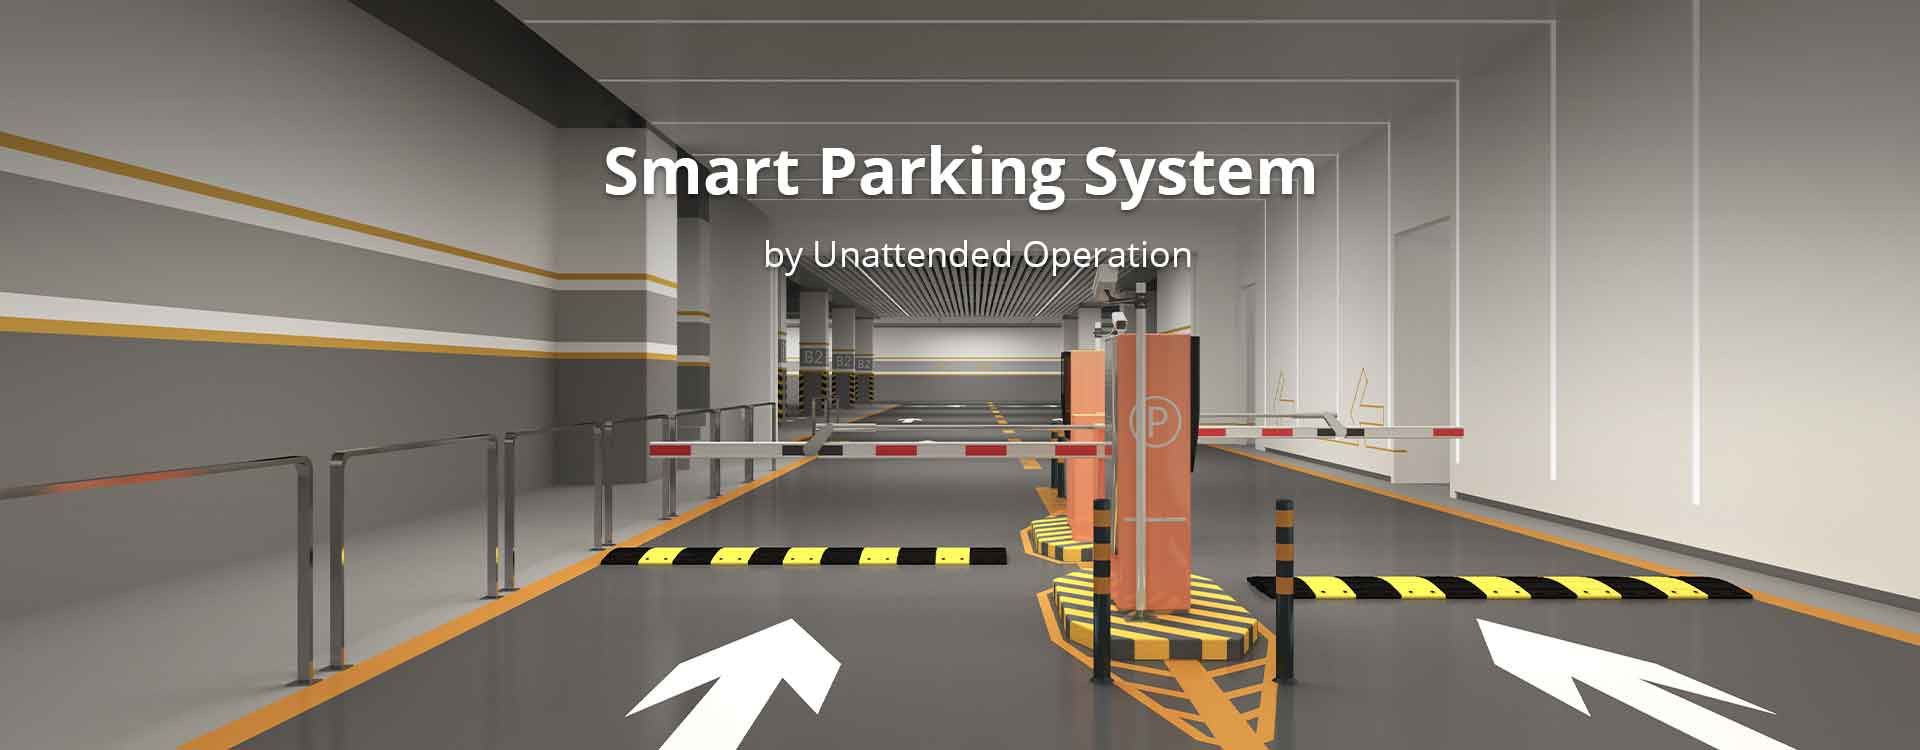 Smart Parking System by Unattended Operation